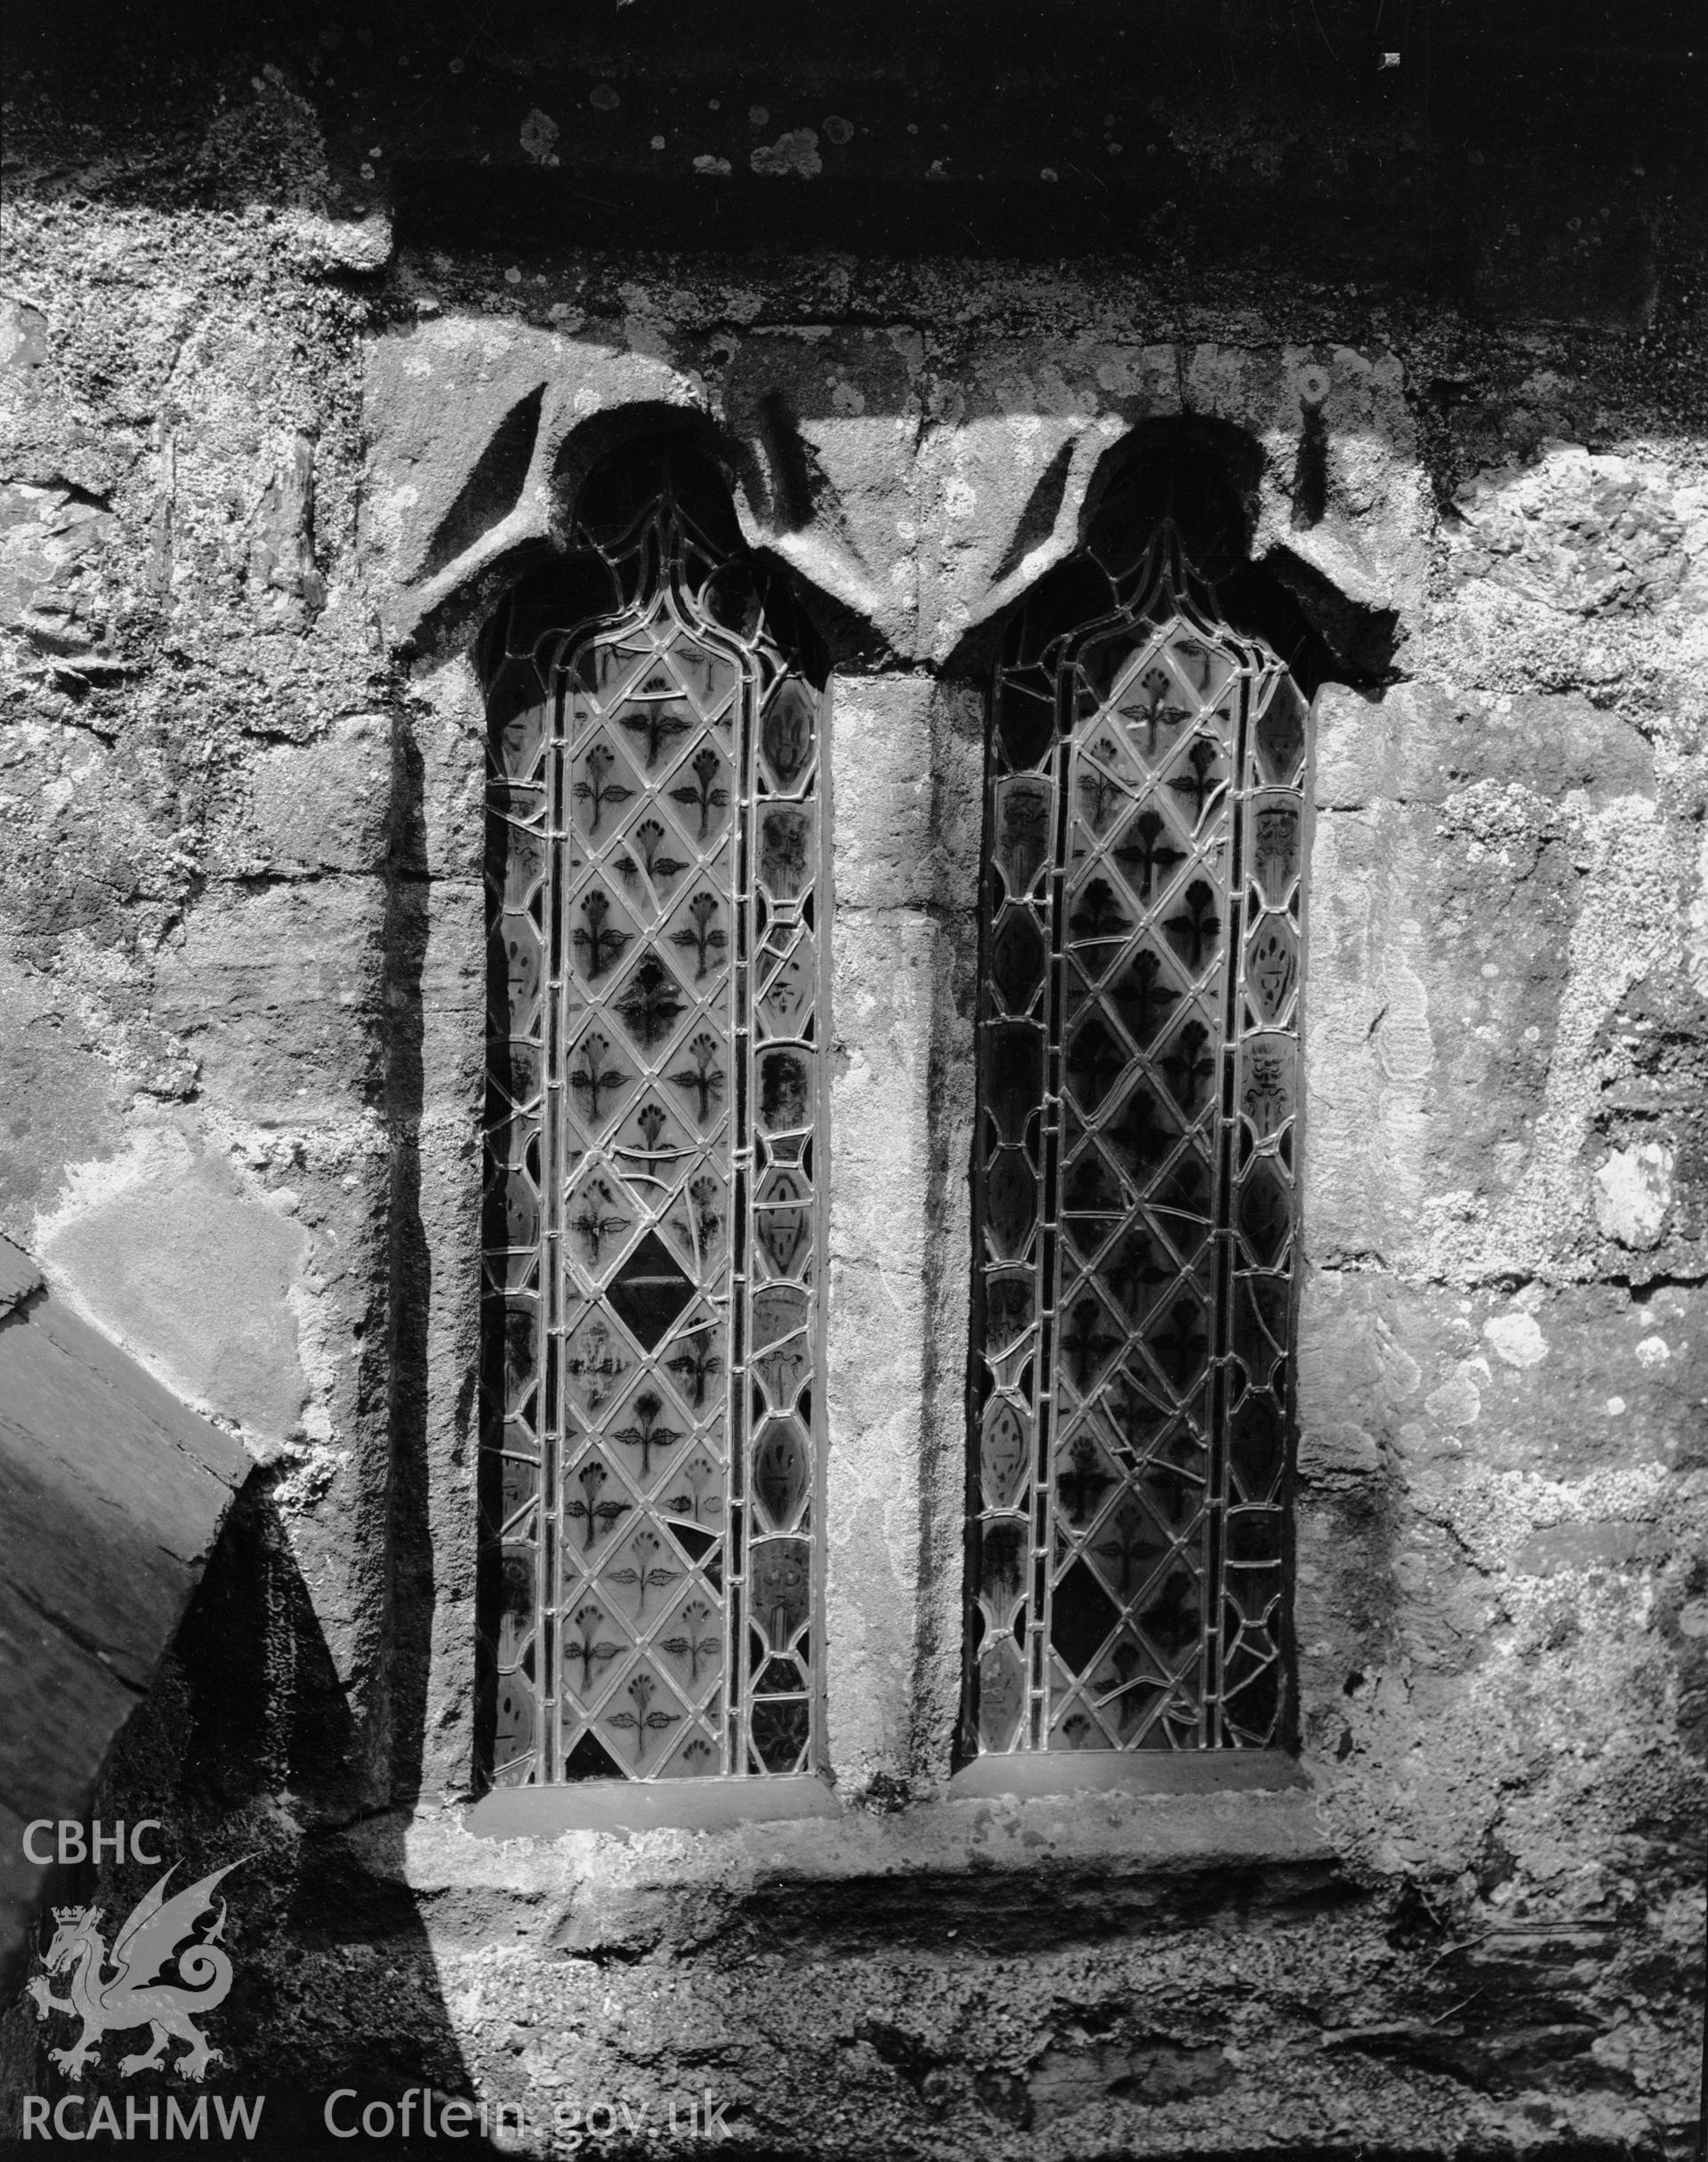 Digitised copy of a black and white negative showing window at St Mary's Church produced by RCAHMW, pre1960.